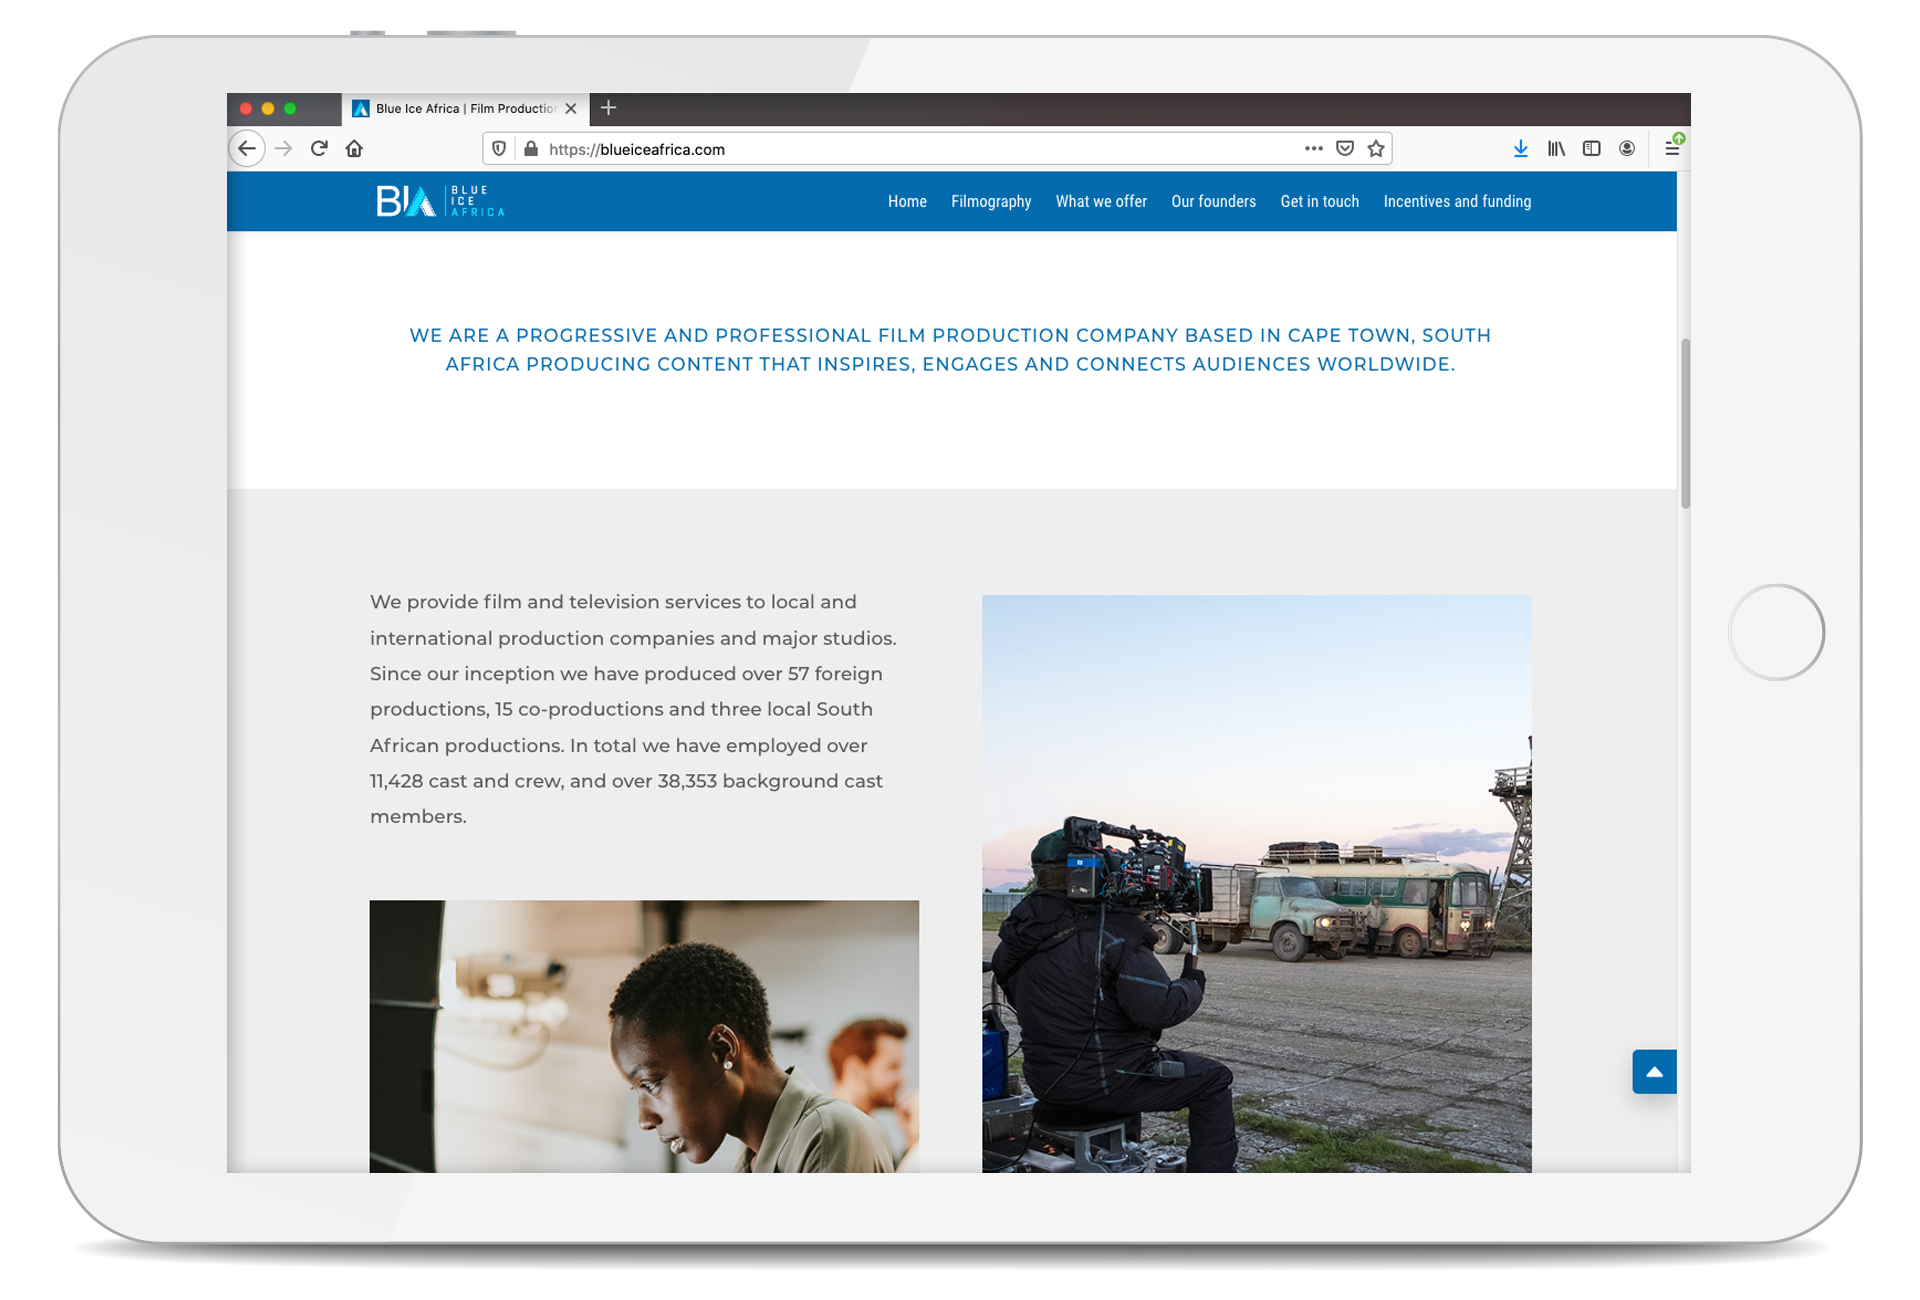 Blue Ice Africa: typical website page, designed by MR.SMiTH